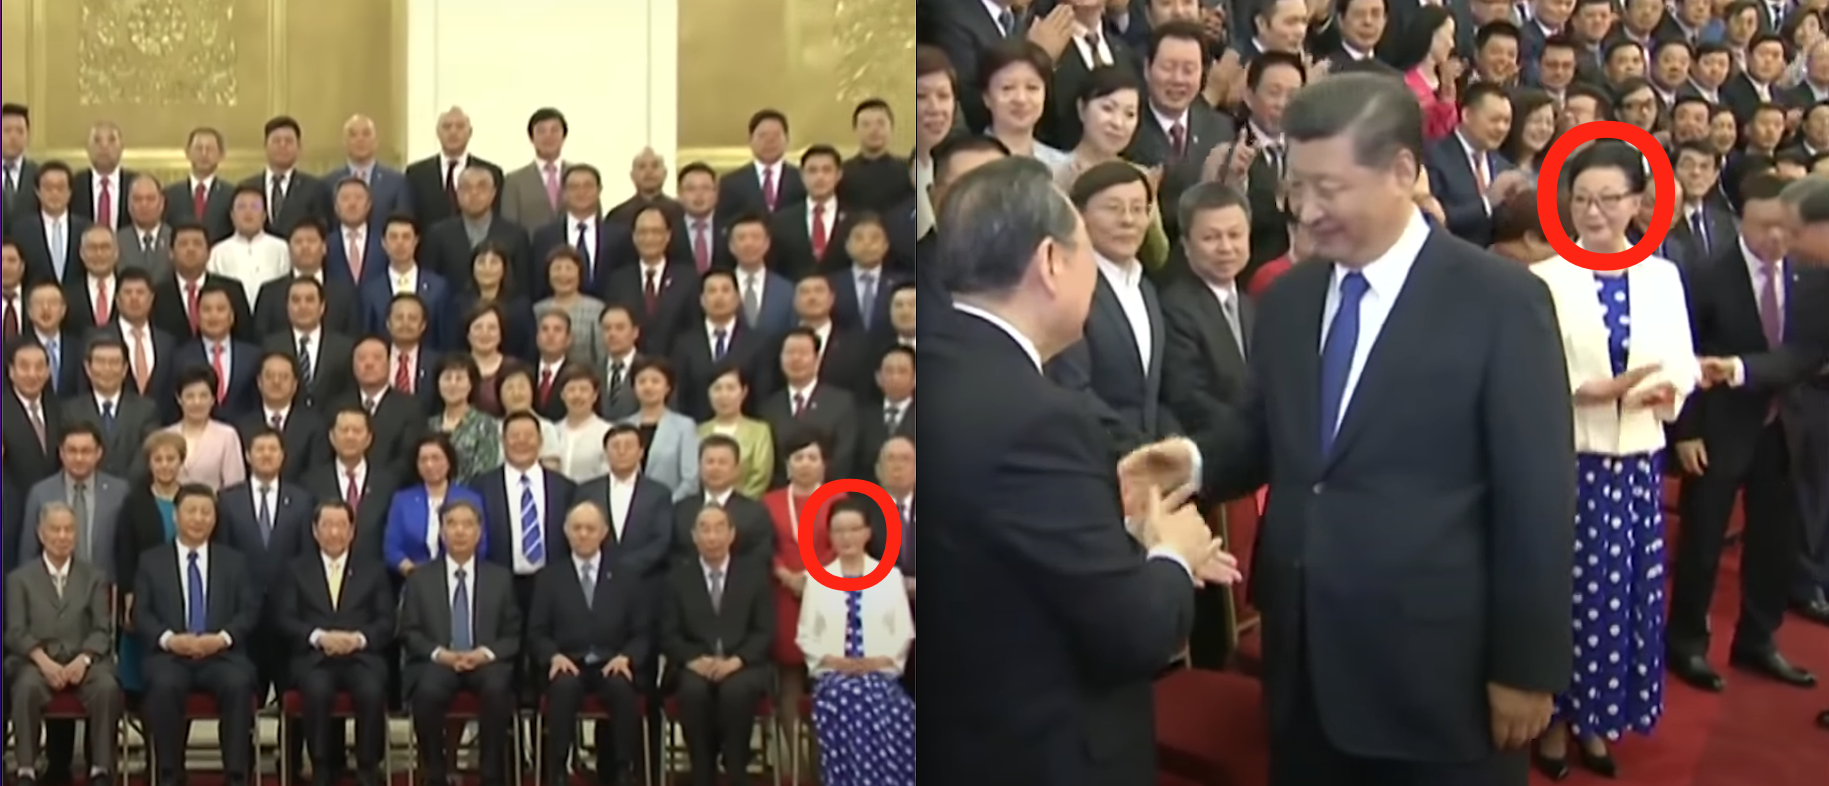 In 2019, Rep. Judy Chu’s decades-long colleague at the All America Chinese Youth Federation, Florence Fang, appears to have attended the China Overseas Friendship Association meeting in Beijing where she sat just seats away from General Secretary Xi Jinping and applauded the communist dictator as he glad-handed the other members of the alleged “Chinese intelligence service” front group. [YouTube/Screenshot/CCTV中国电视台]